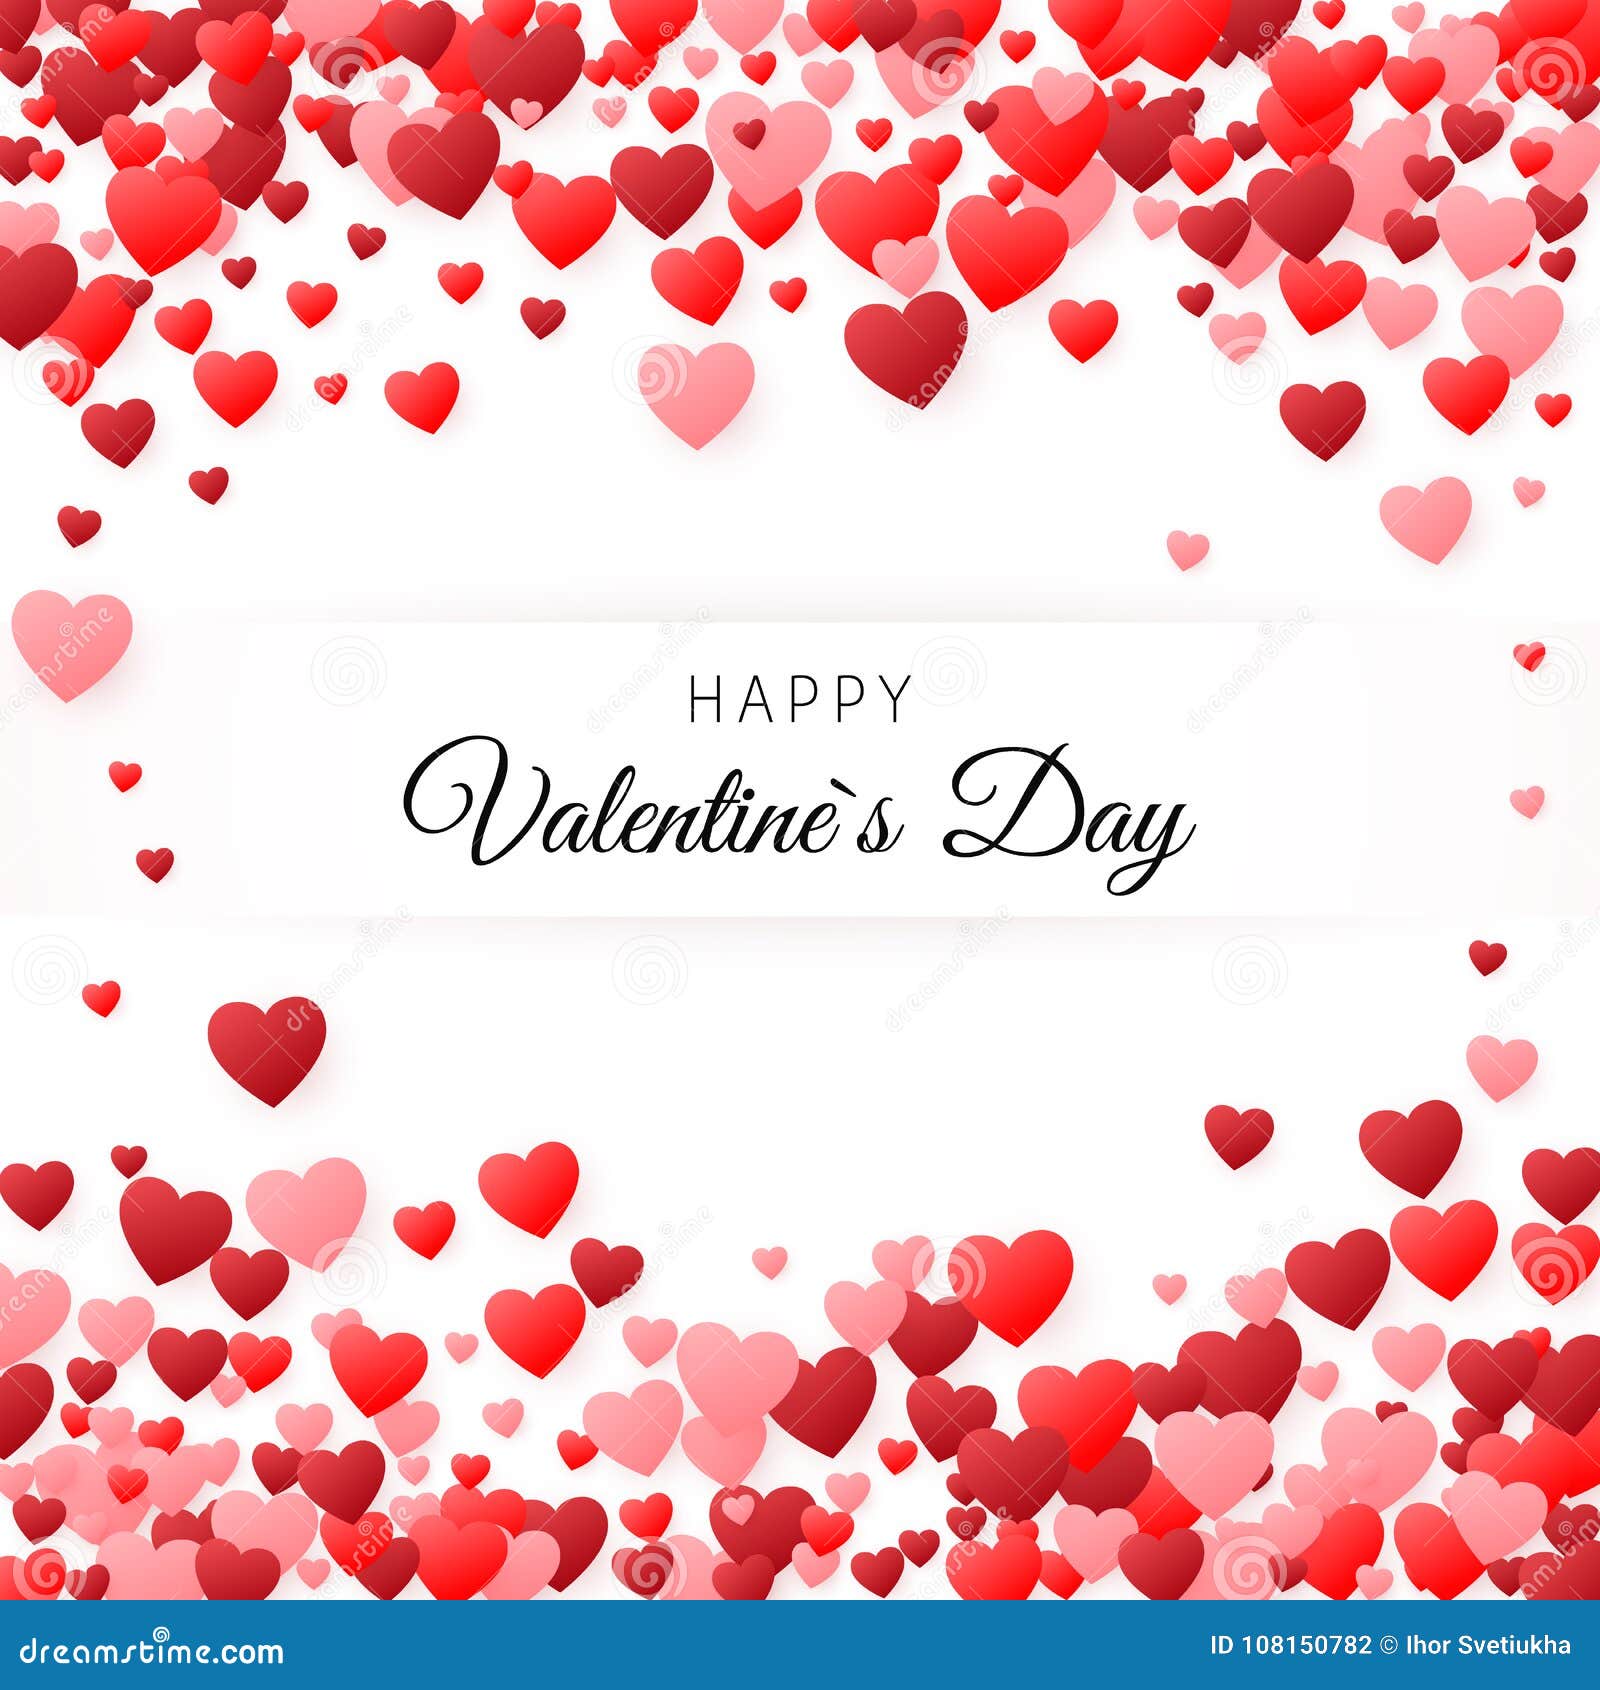 happy valentines day greeting card. greeting card cover template. background filled with hearts with place for inscription. 